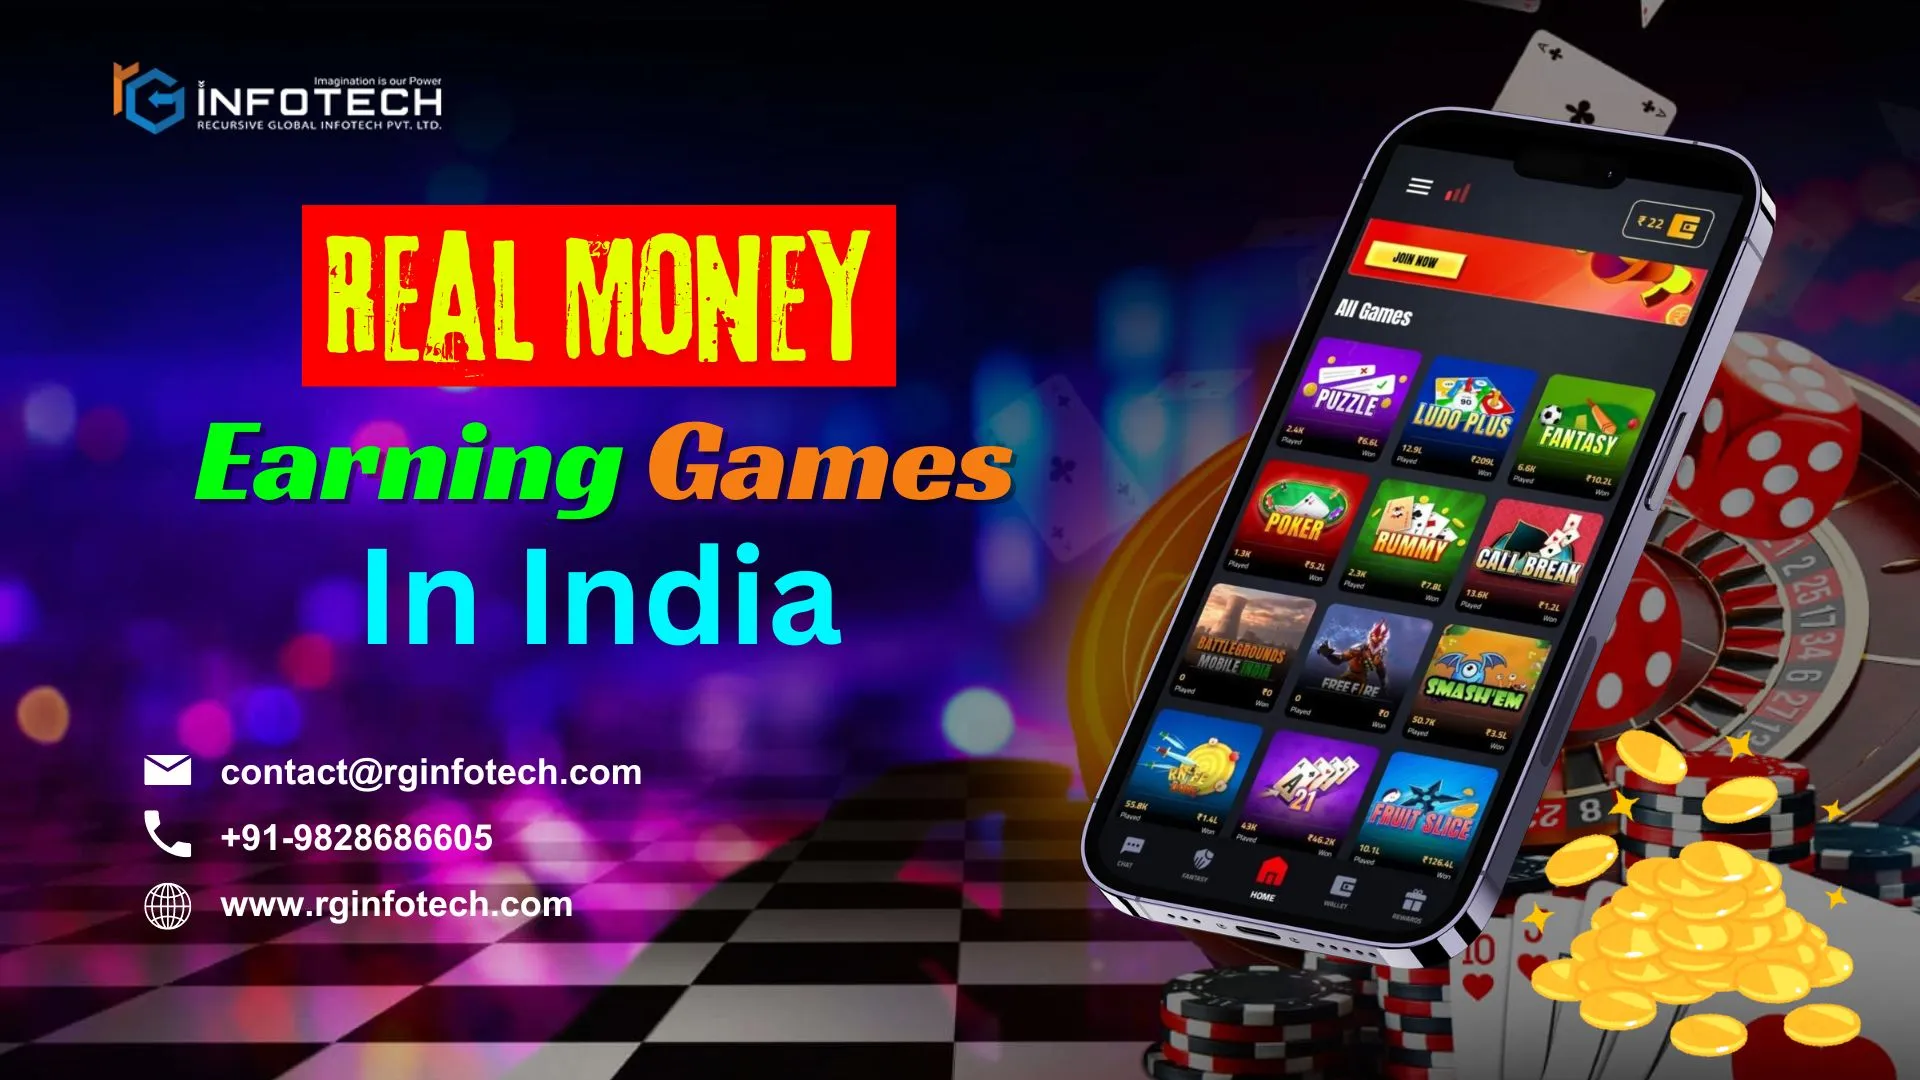 Real Money Earning Games in India